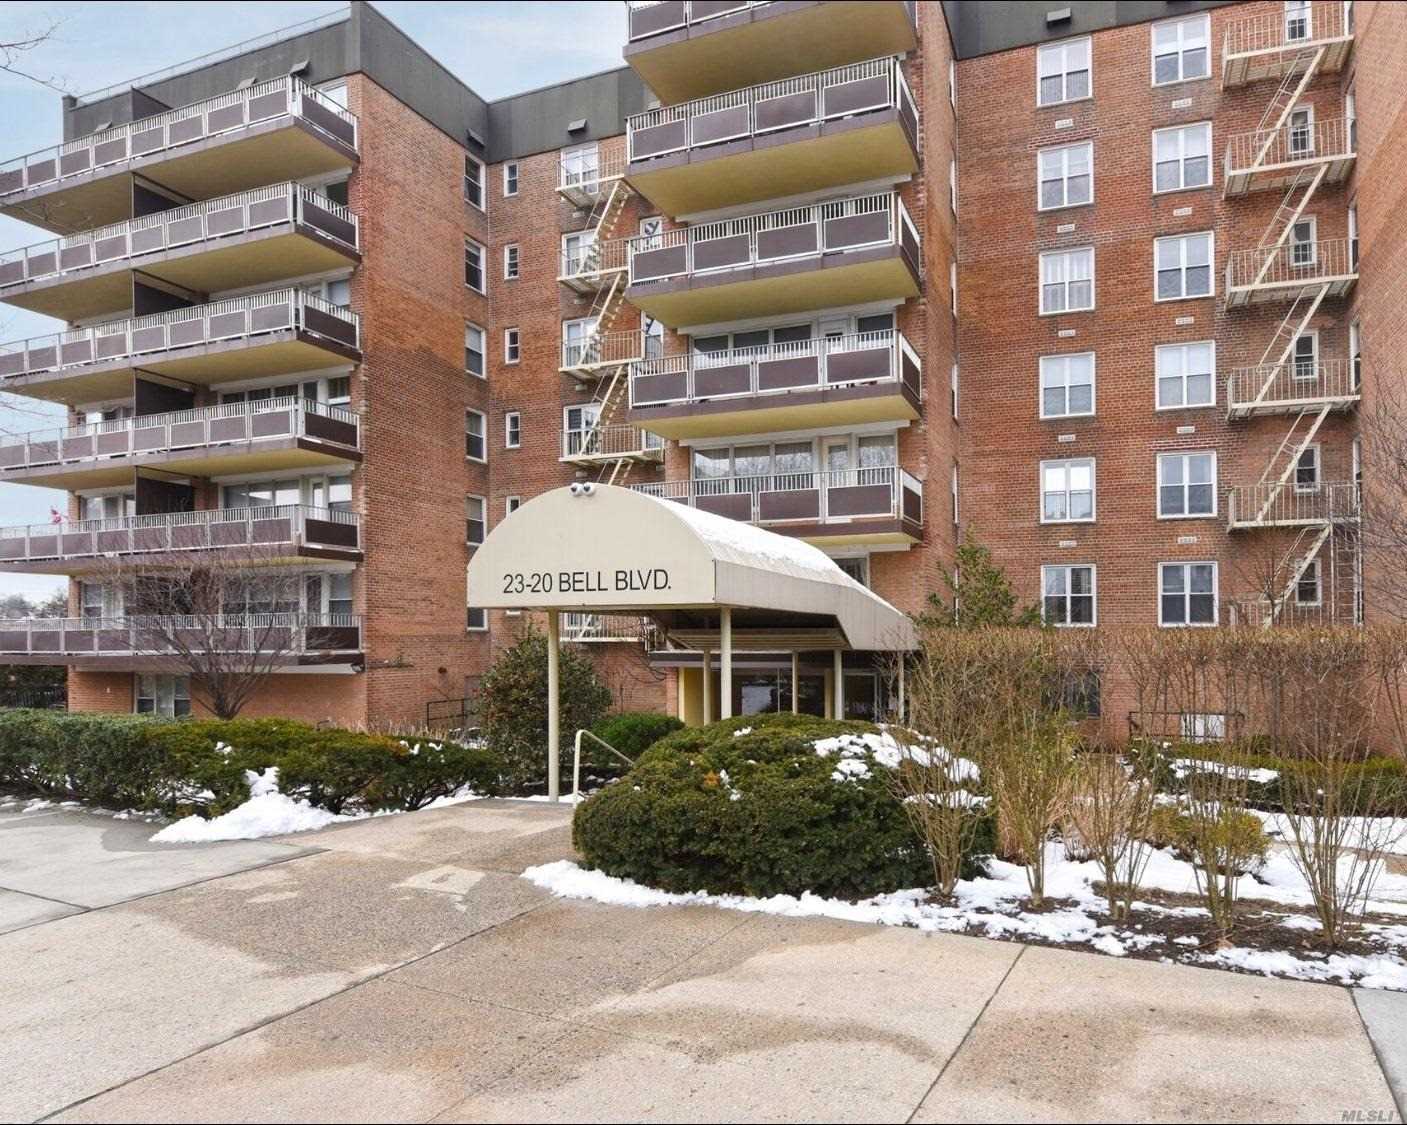 Spacious Top Floor Jr.4 With Water Views From All Rooms . Light Filled Extra Large Living Room/Dining Room, Eik, Bed , Bath, Closets Galore, Hardwood Floors, In-Ground Private Pool, All Utilities Included. Magnificent Balcony With Water Views Close To Lirr Qm2 Express Bus, Bay Terrace & Bell Blvd Restaurants & Shops . Must See Wont Last